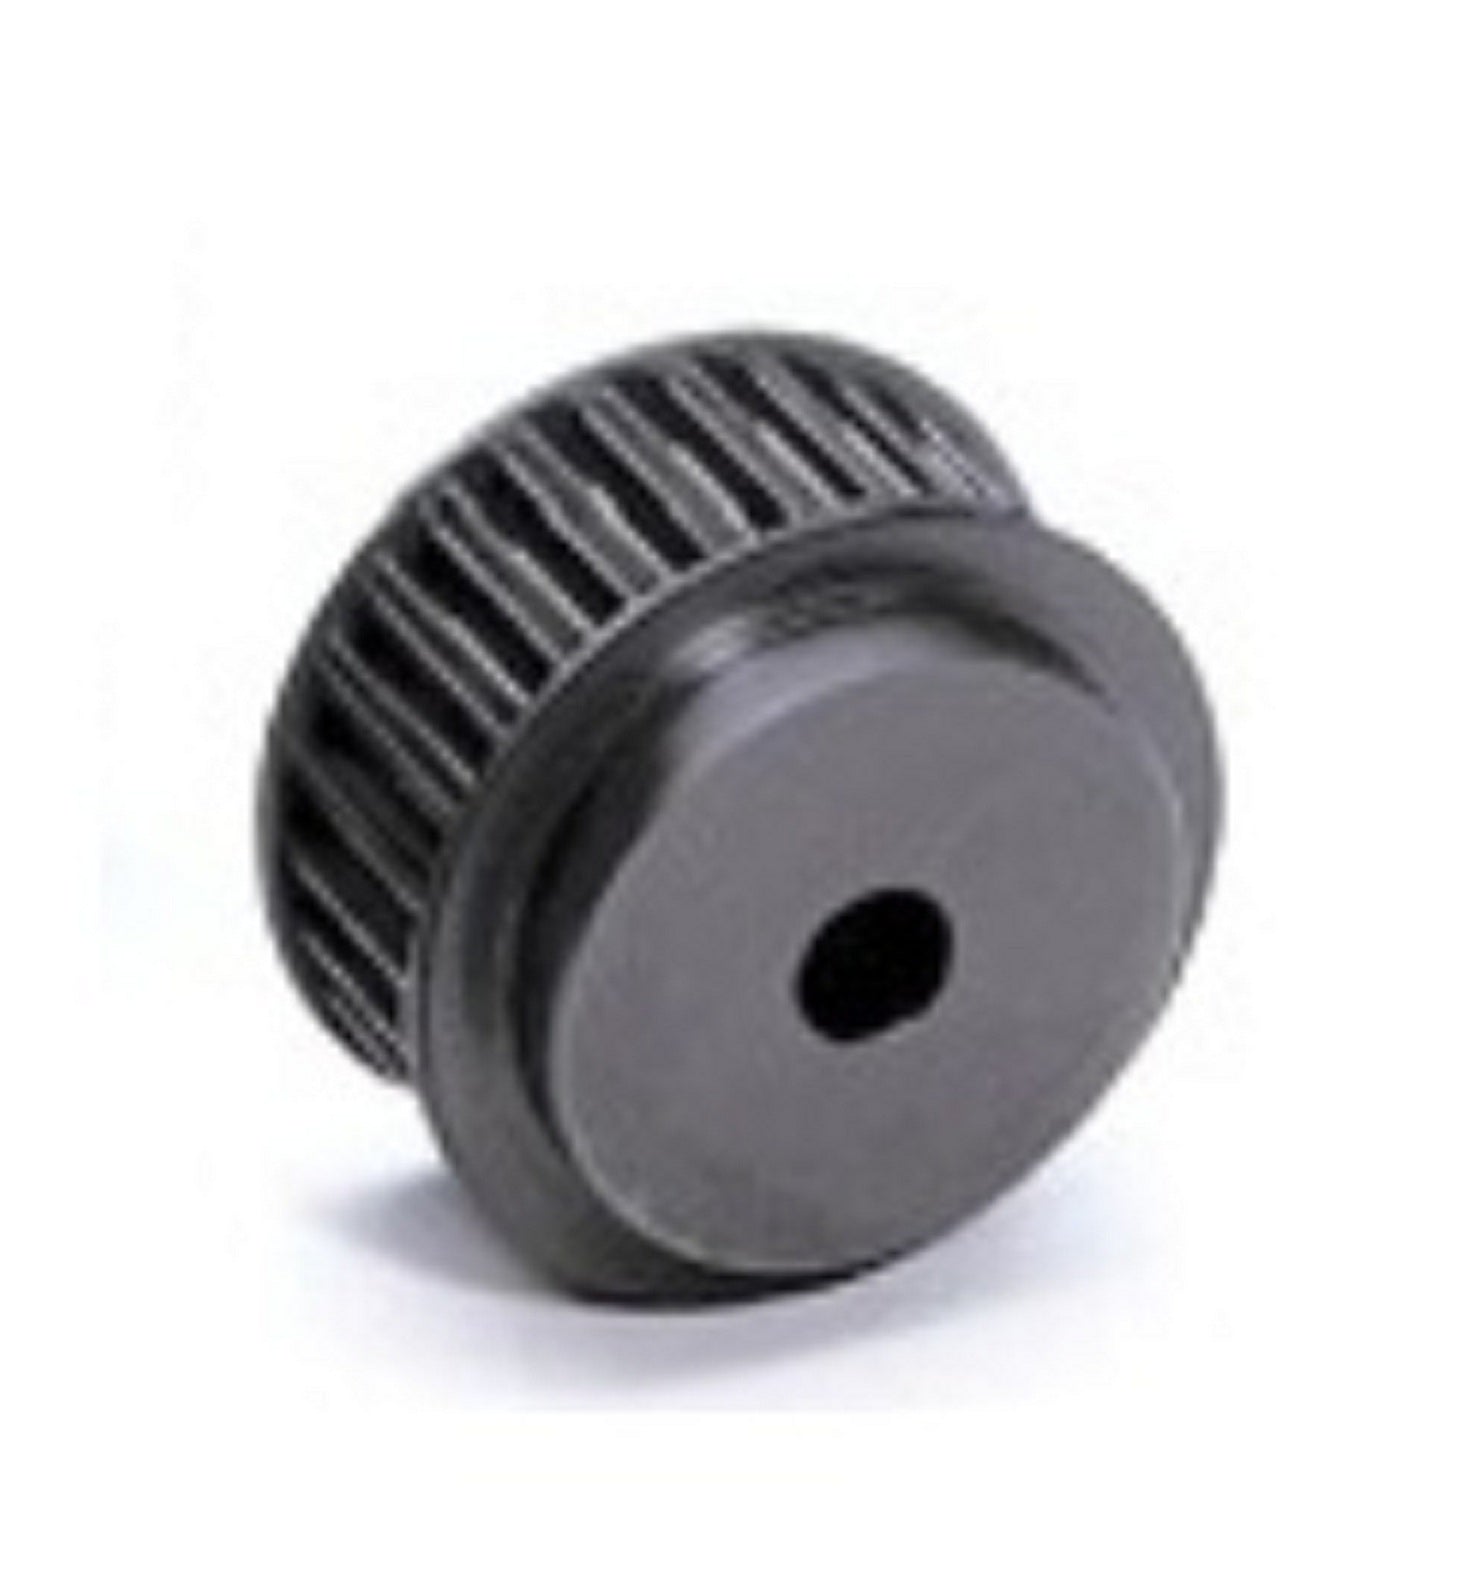 30-8M-30 Steel Pulley 30 tooth MPB